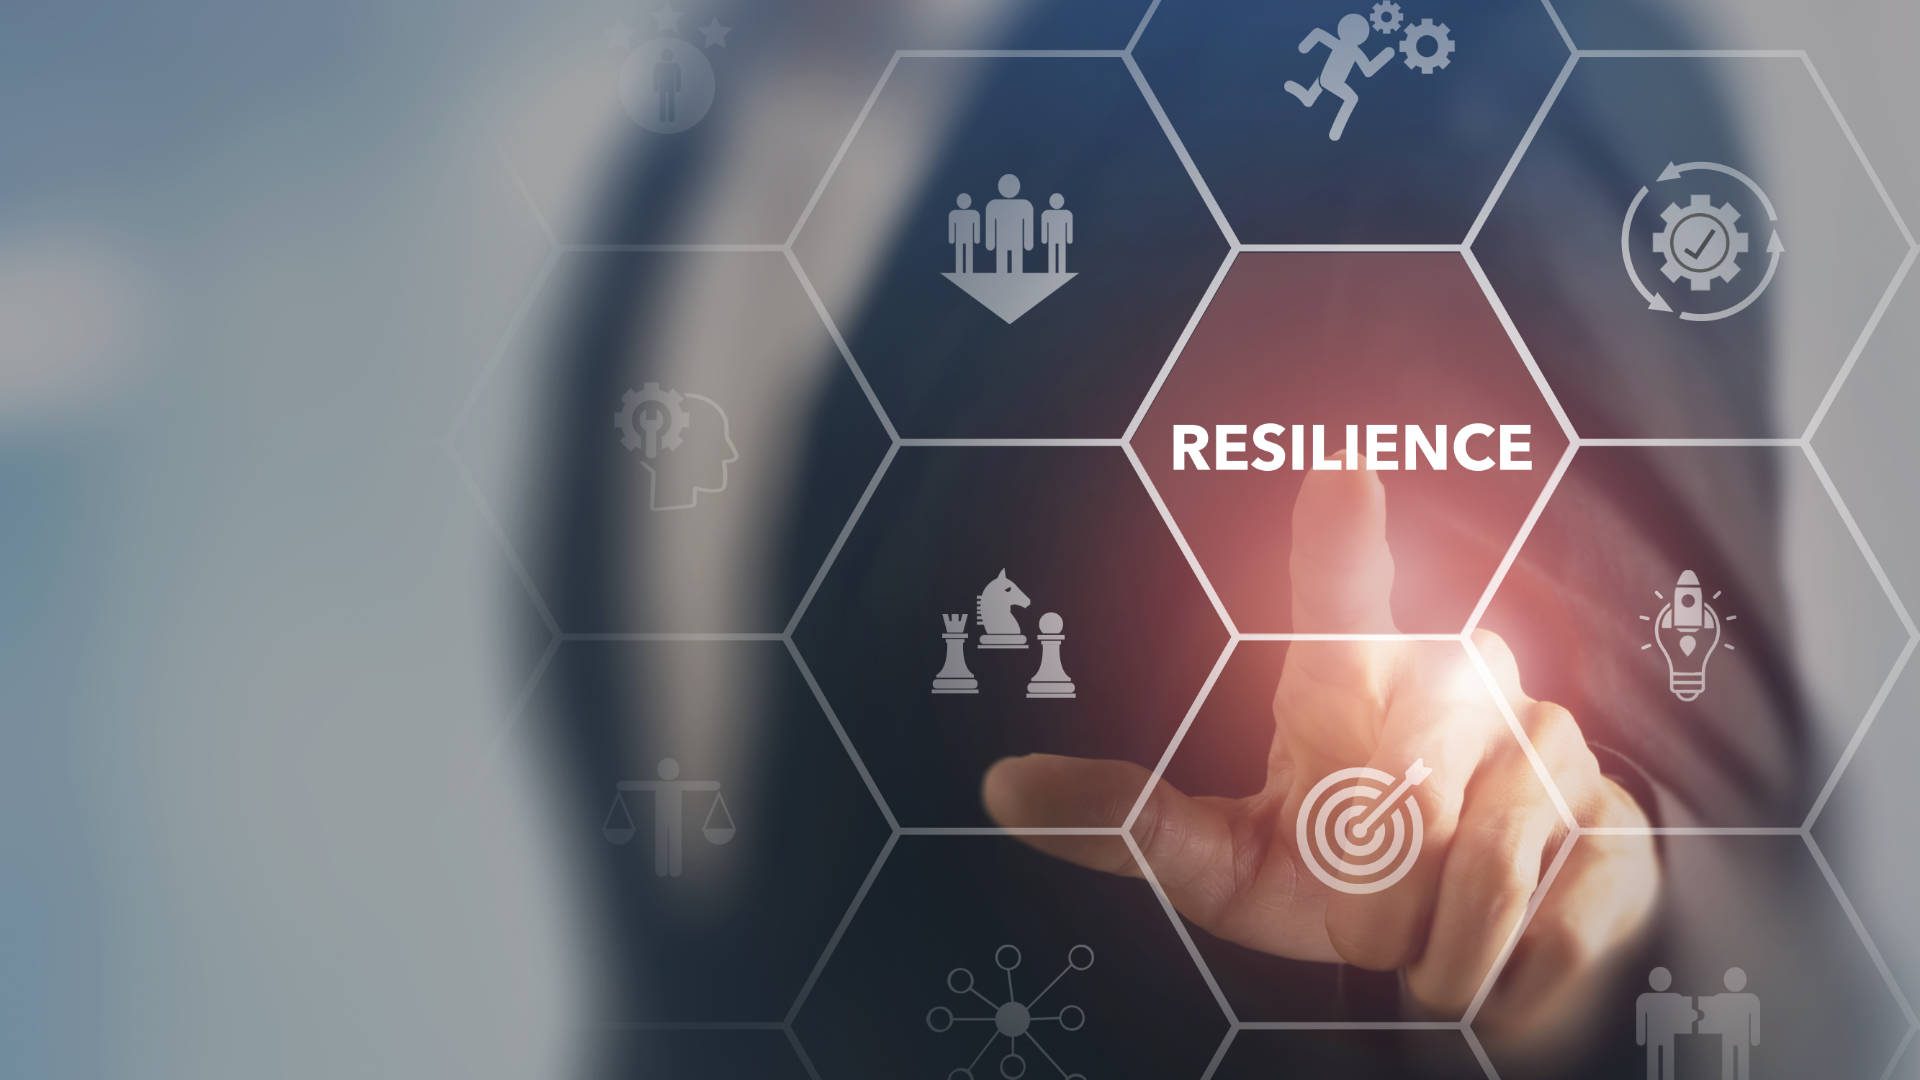 Build business resilience with ISO 22301 alongside ISO 27001